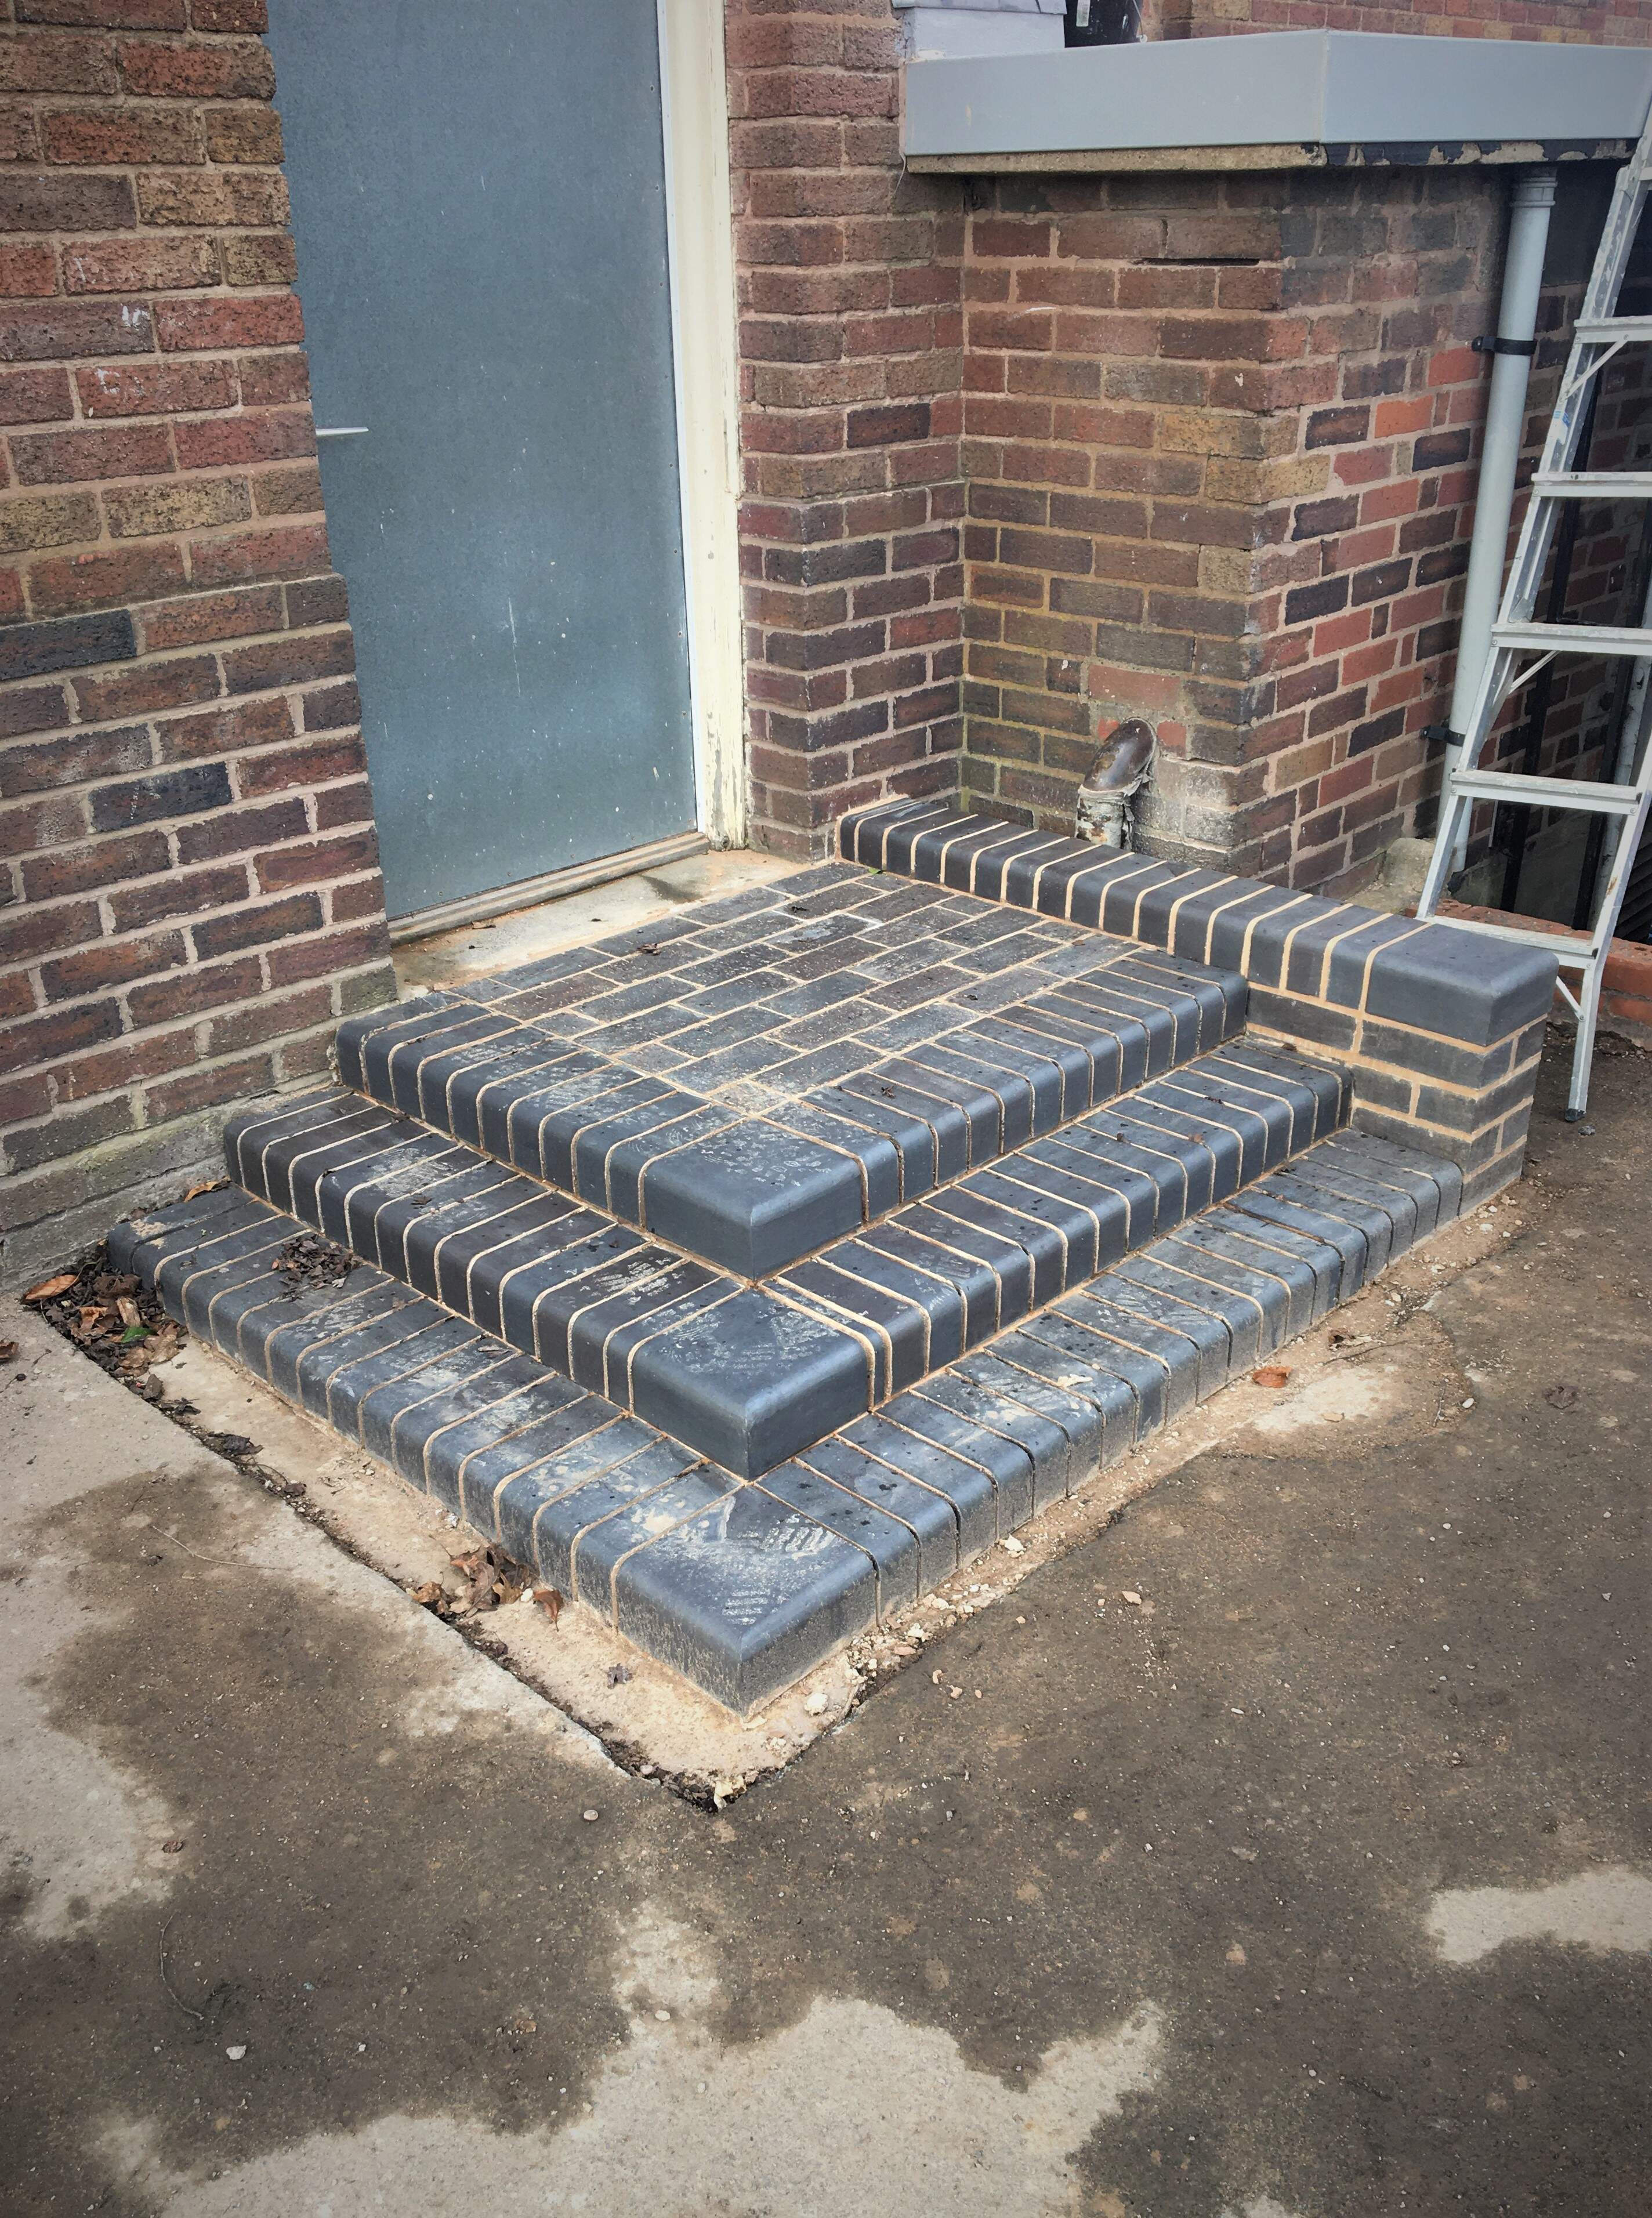 New steps to the Sacristry